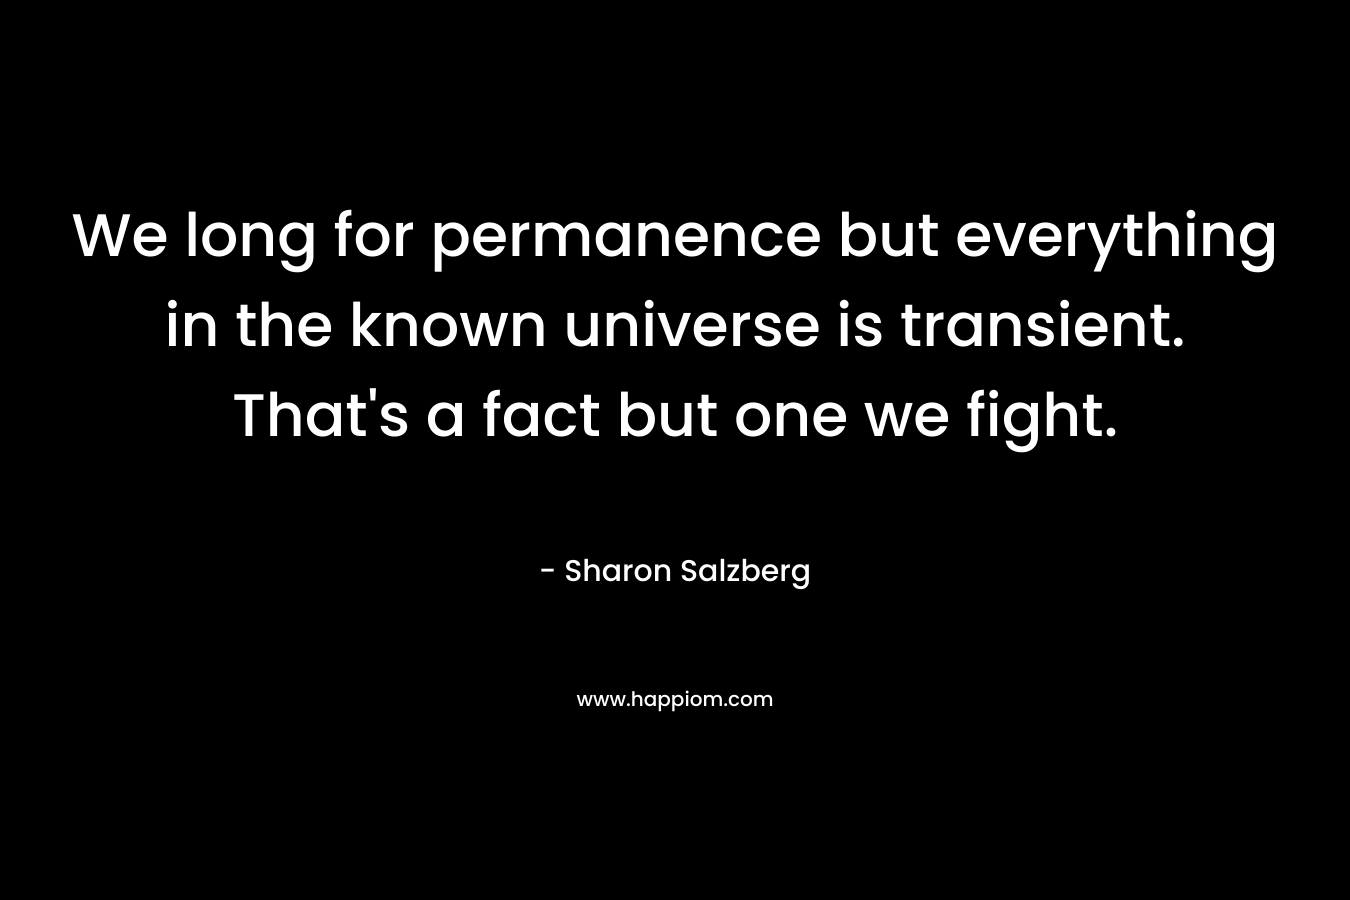 We long for permanence but everything in the known universe is transient. That's a fact but one we fight.